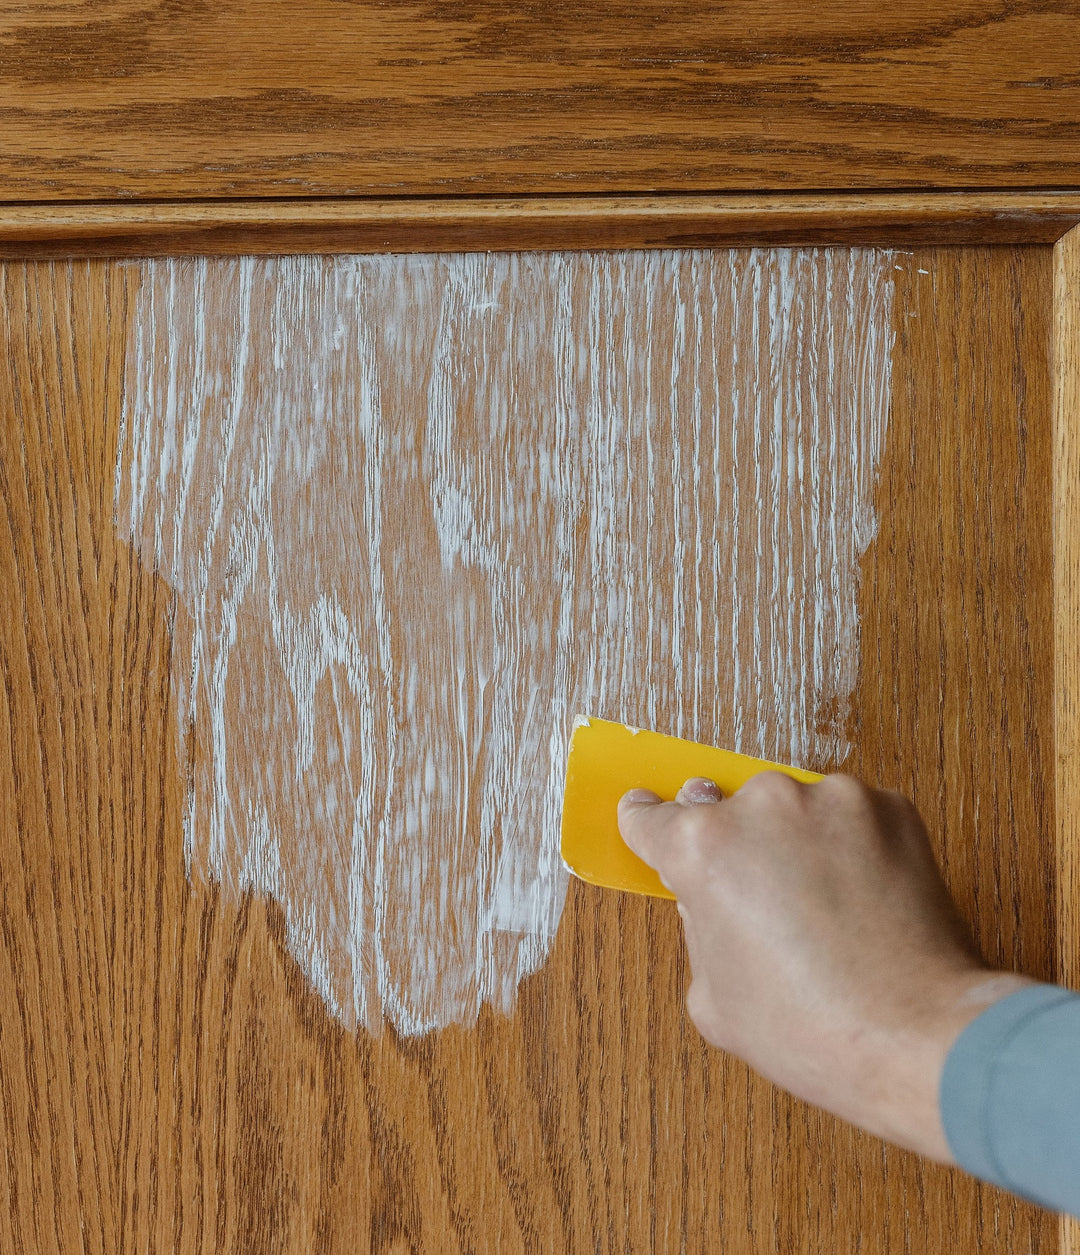 A piece of wood cabinetry with Aqua Coat Grain filler being applied with a yellow applicator